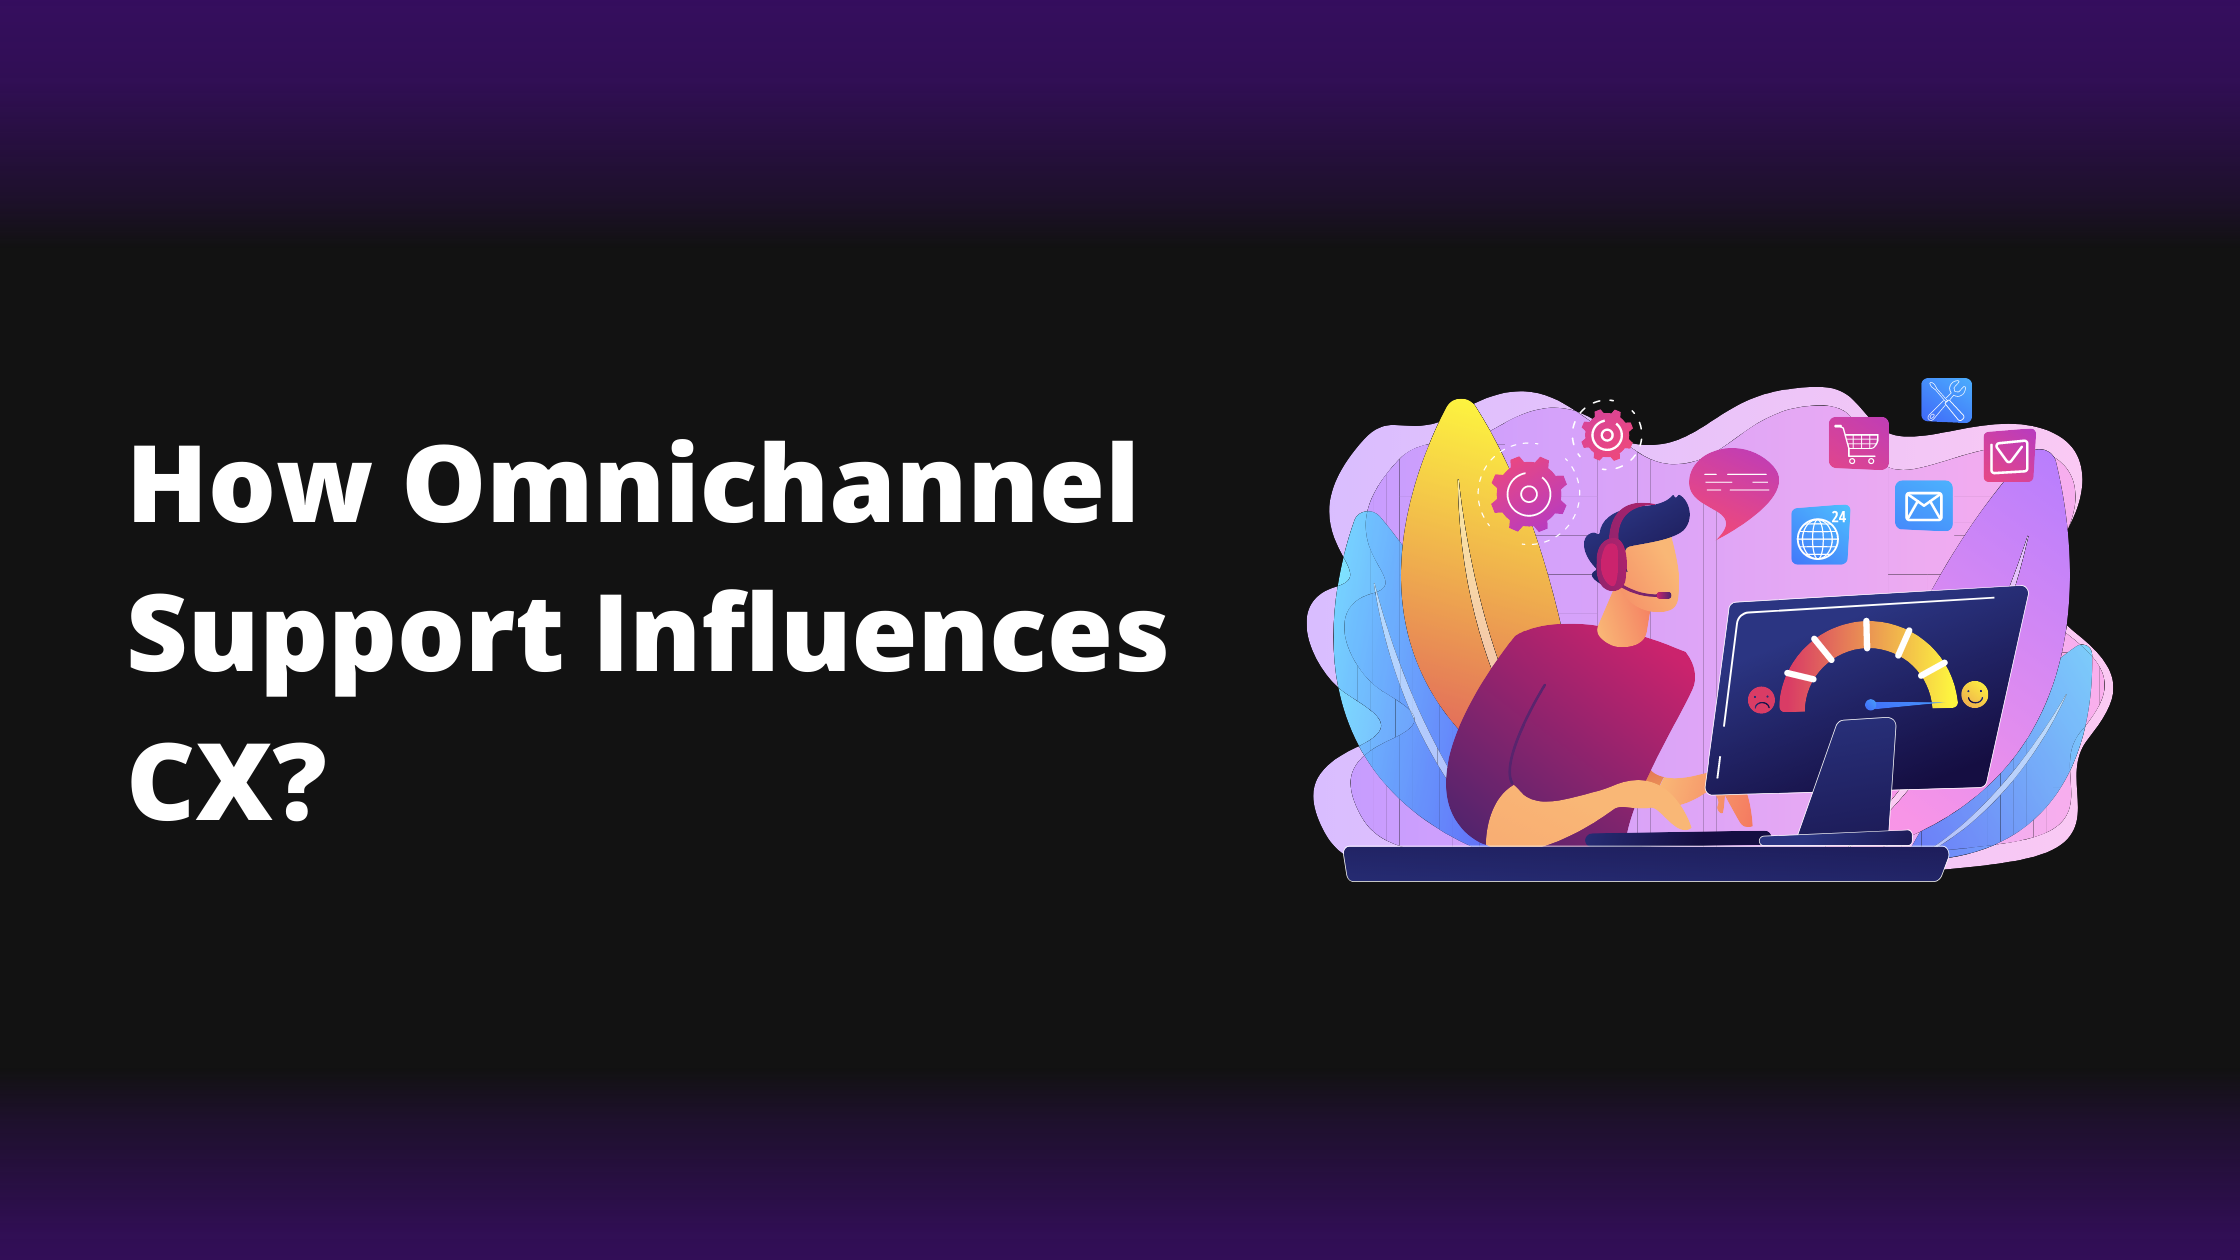 How Omnichannel Support Influences Customer Experience (CX)?